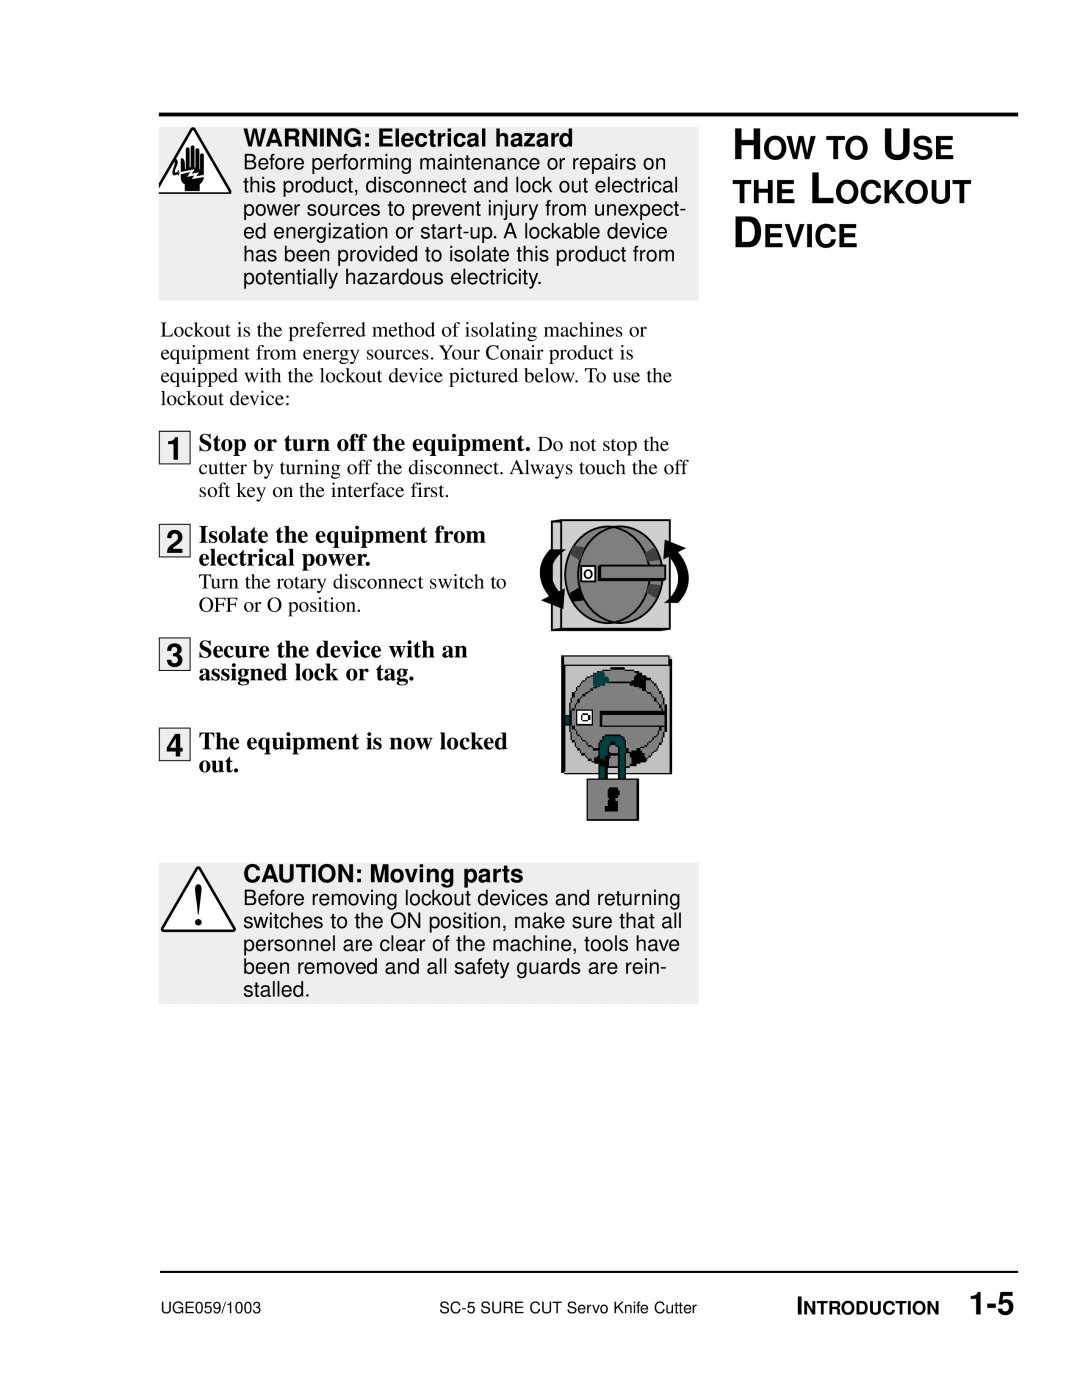 Conair SC-5 manual How To Use The Lockout Device, WARNING Electrical hazard, Isolate the equipment from, electrical power 